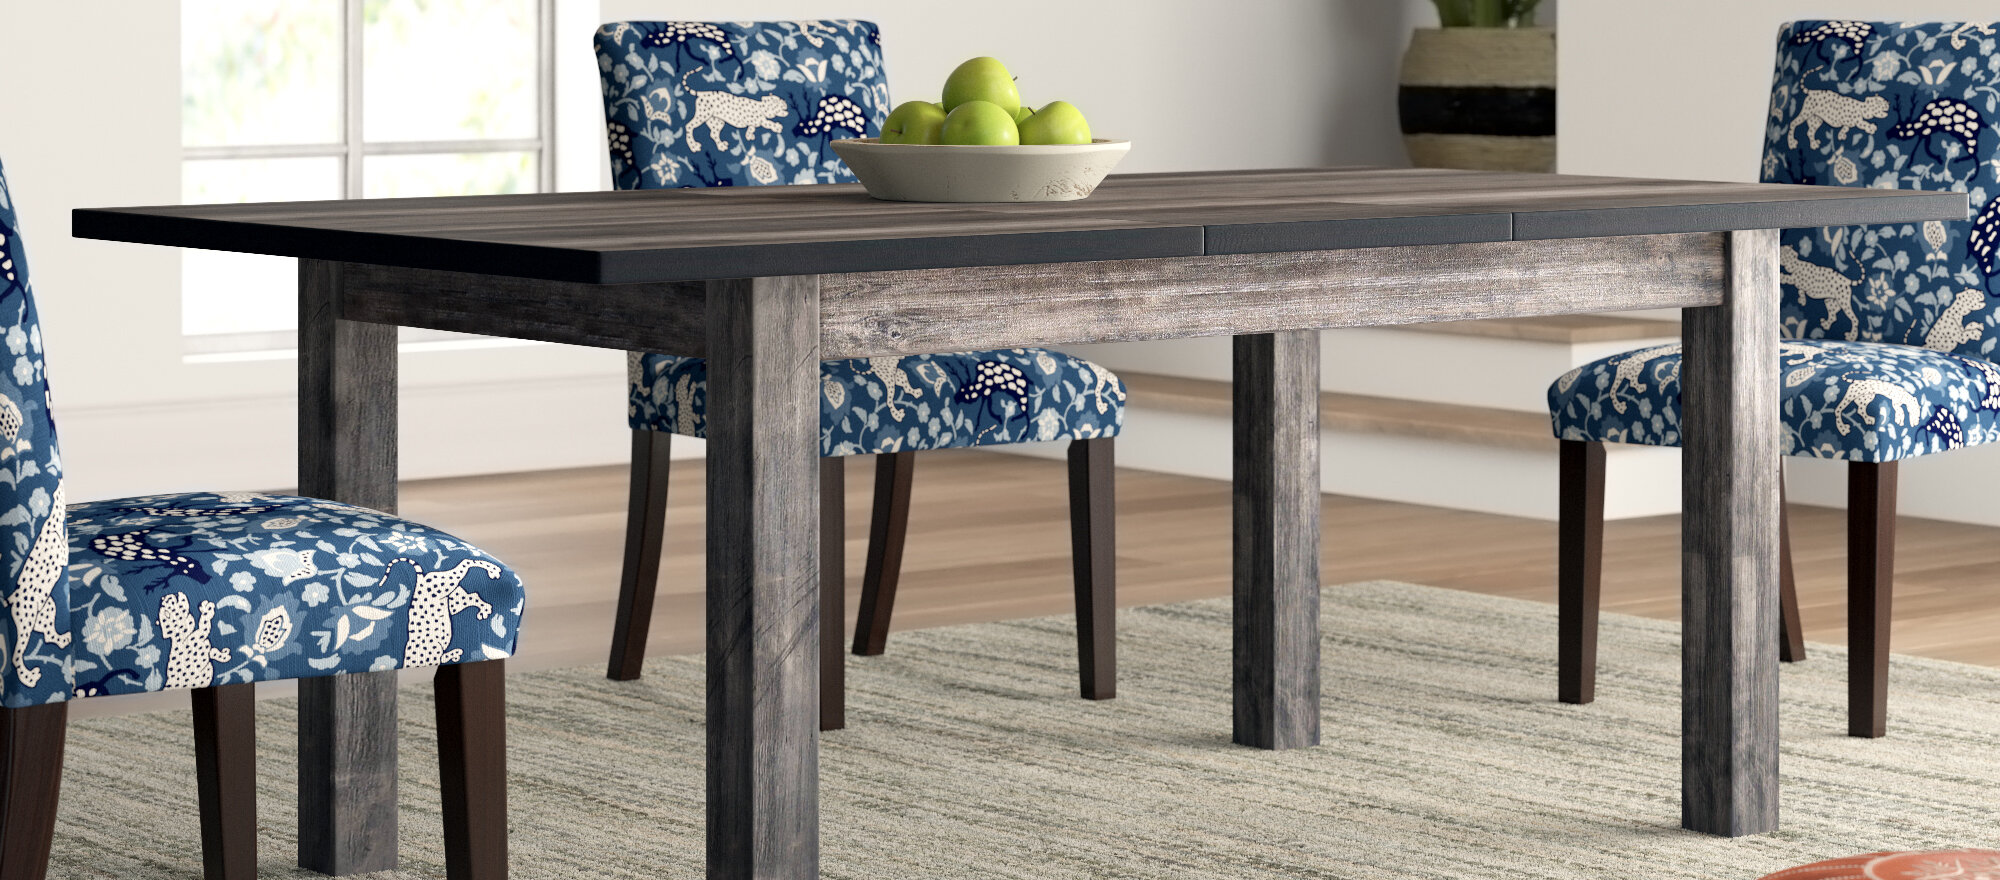 [BIG SALE] Dining Tables Under $500 You’ll Love In 2020 | Wayfair